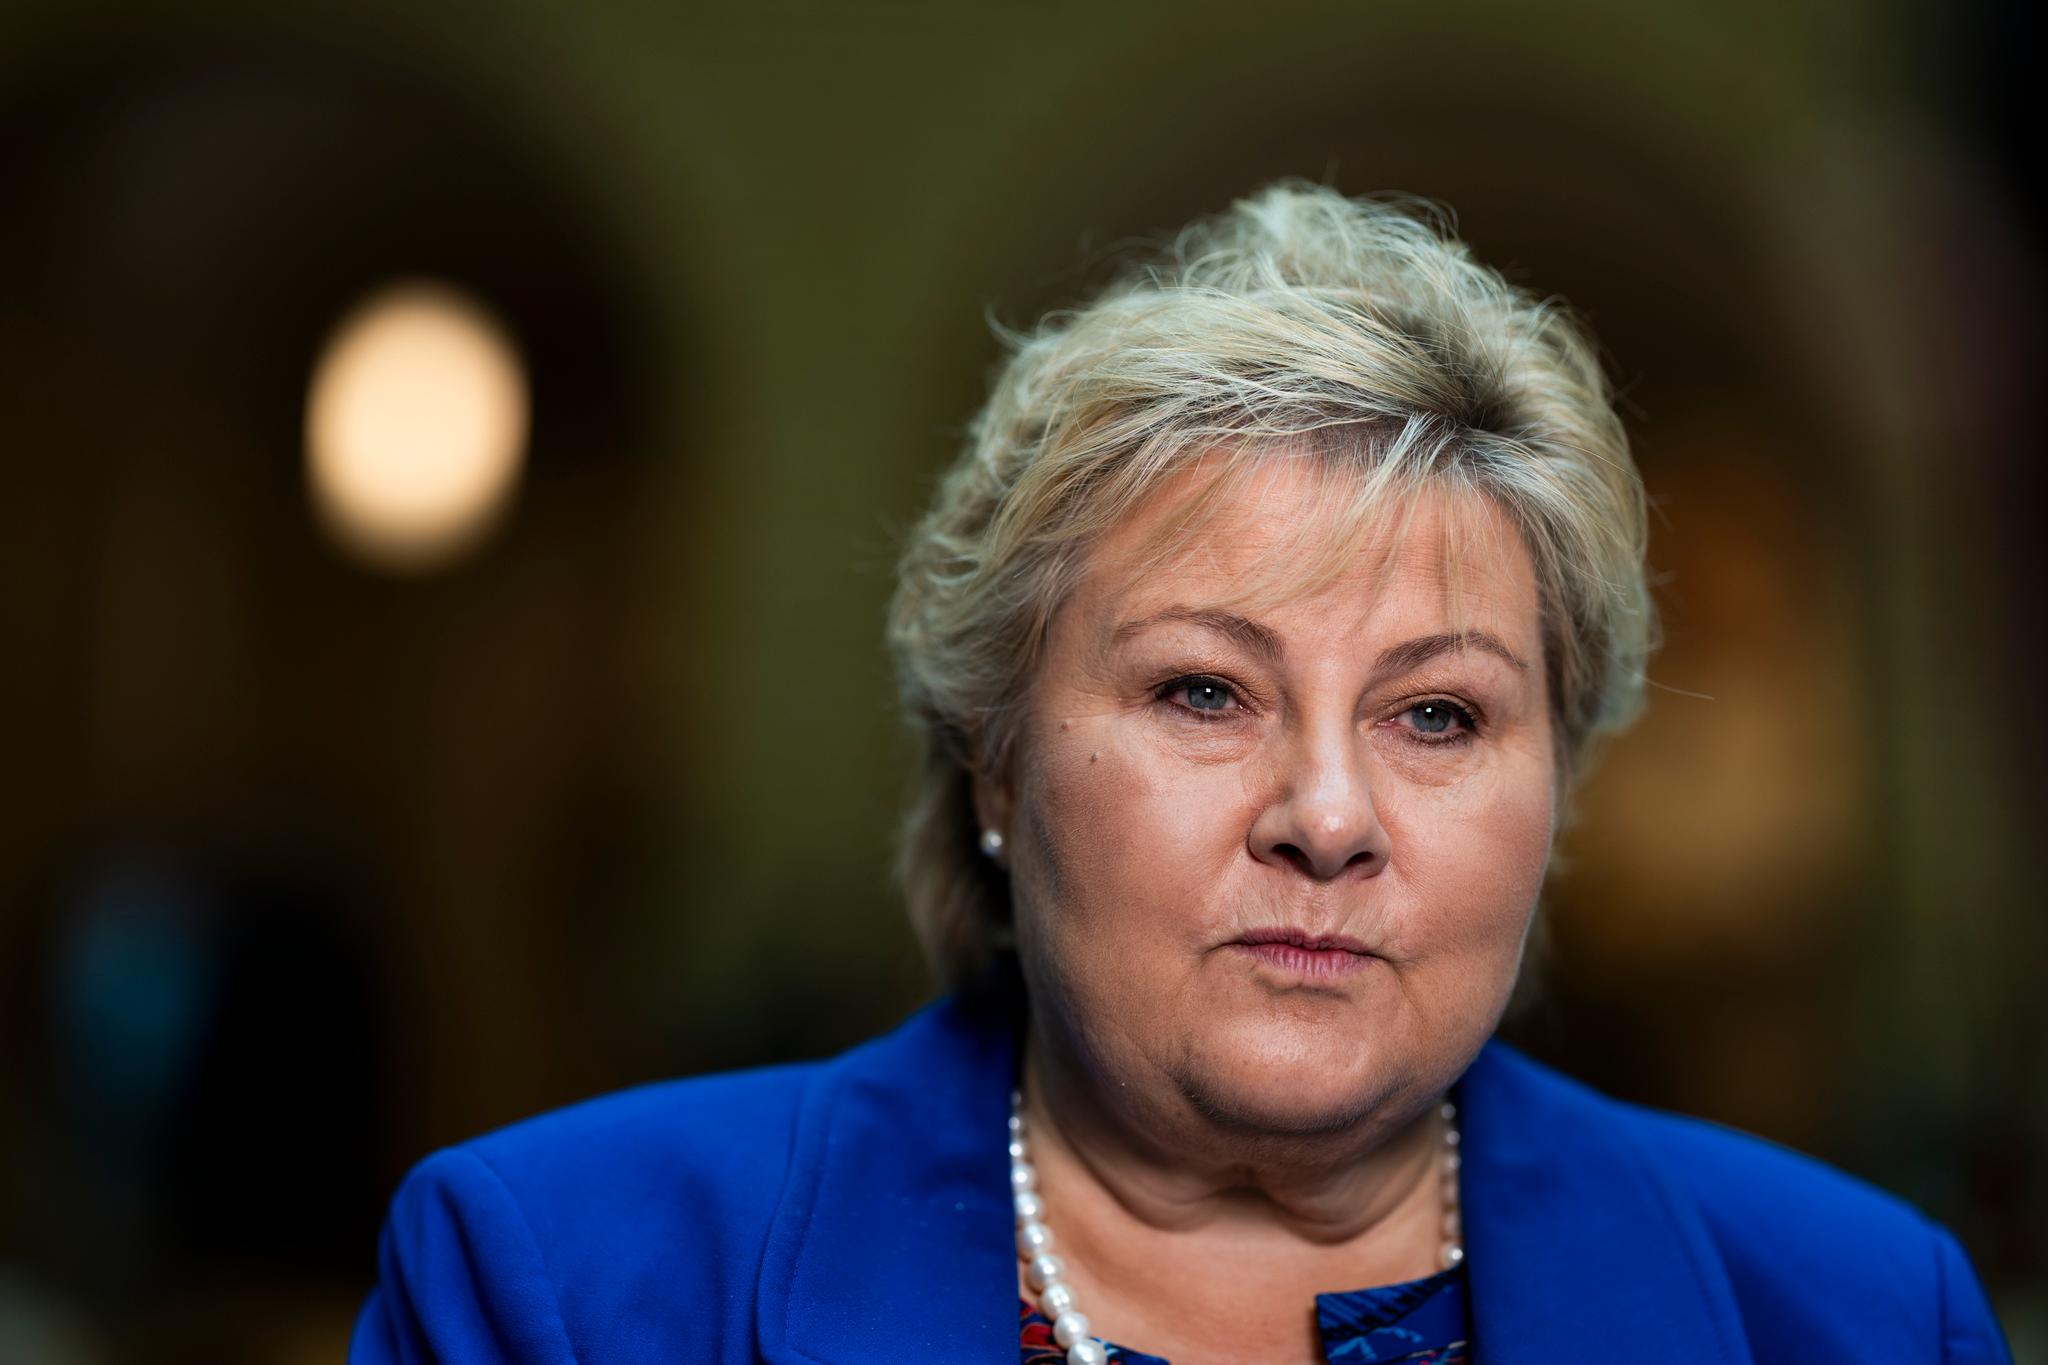 Erna Solberg admits she misjudged the house in Bergen